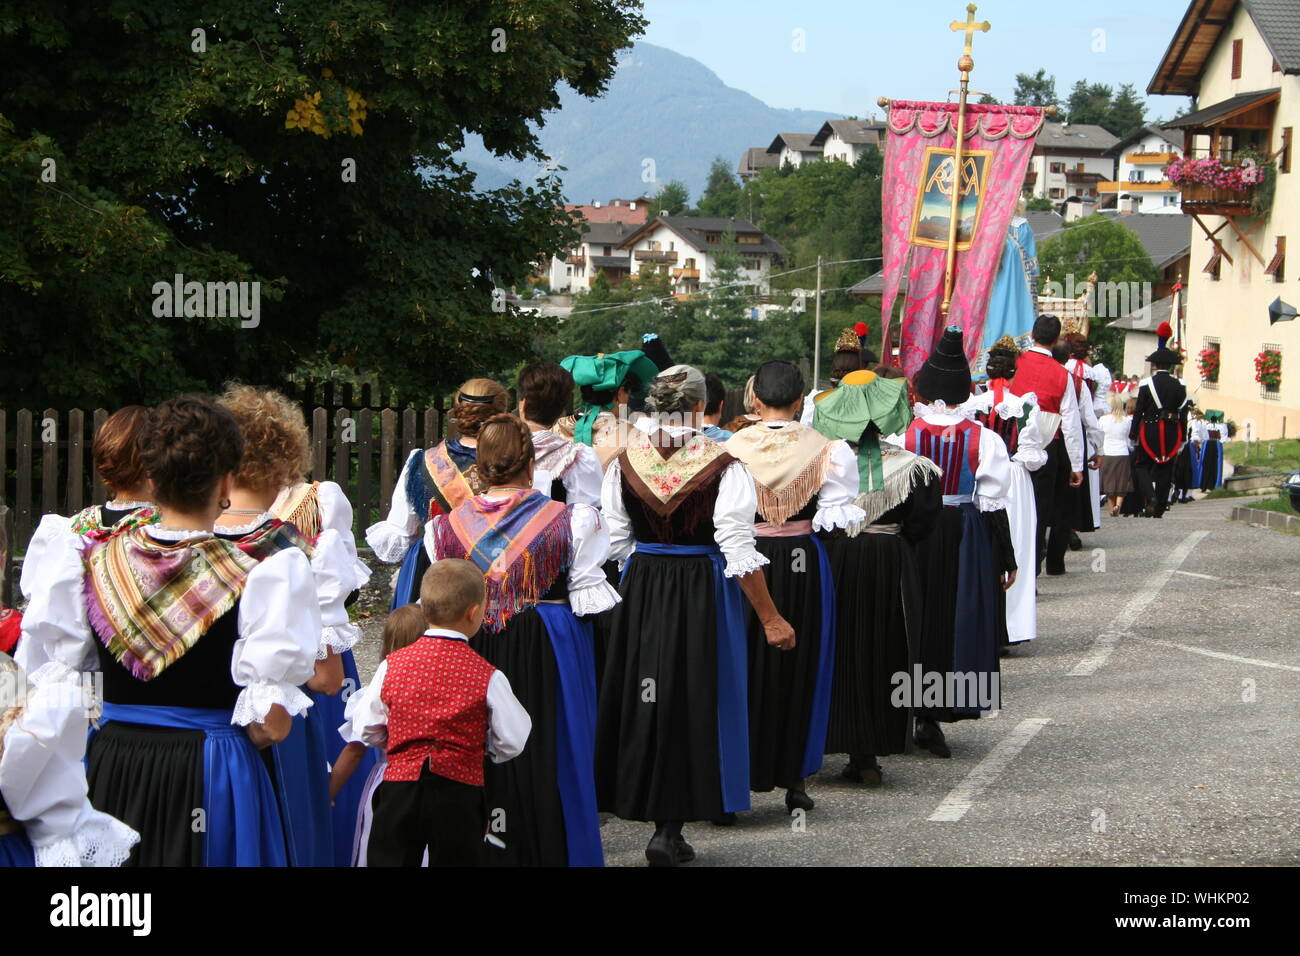 Rear View Of People Walking On Road During Traditional Event Stock Photo